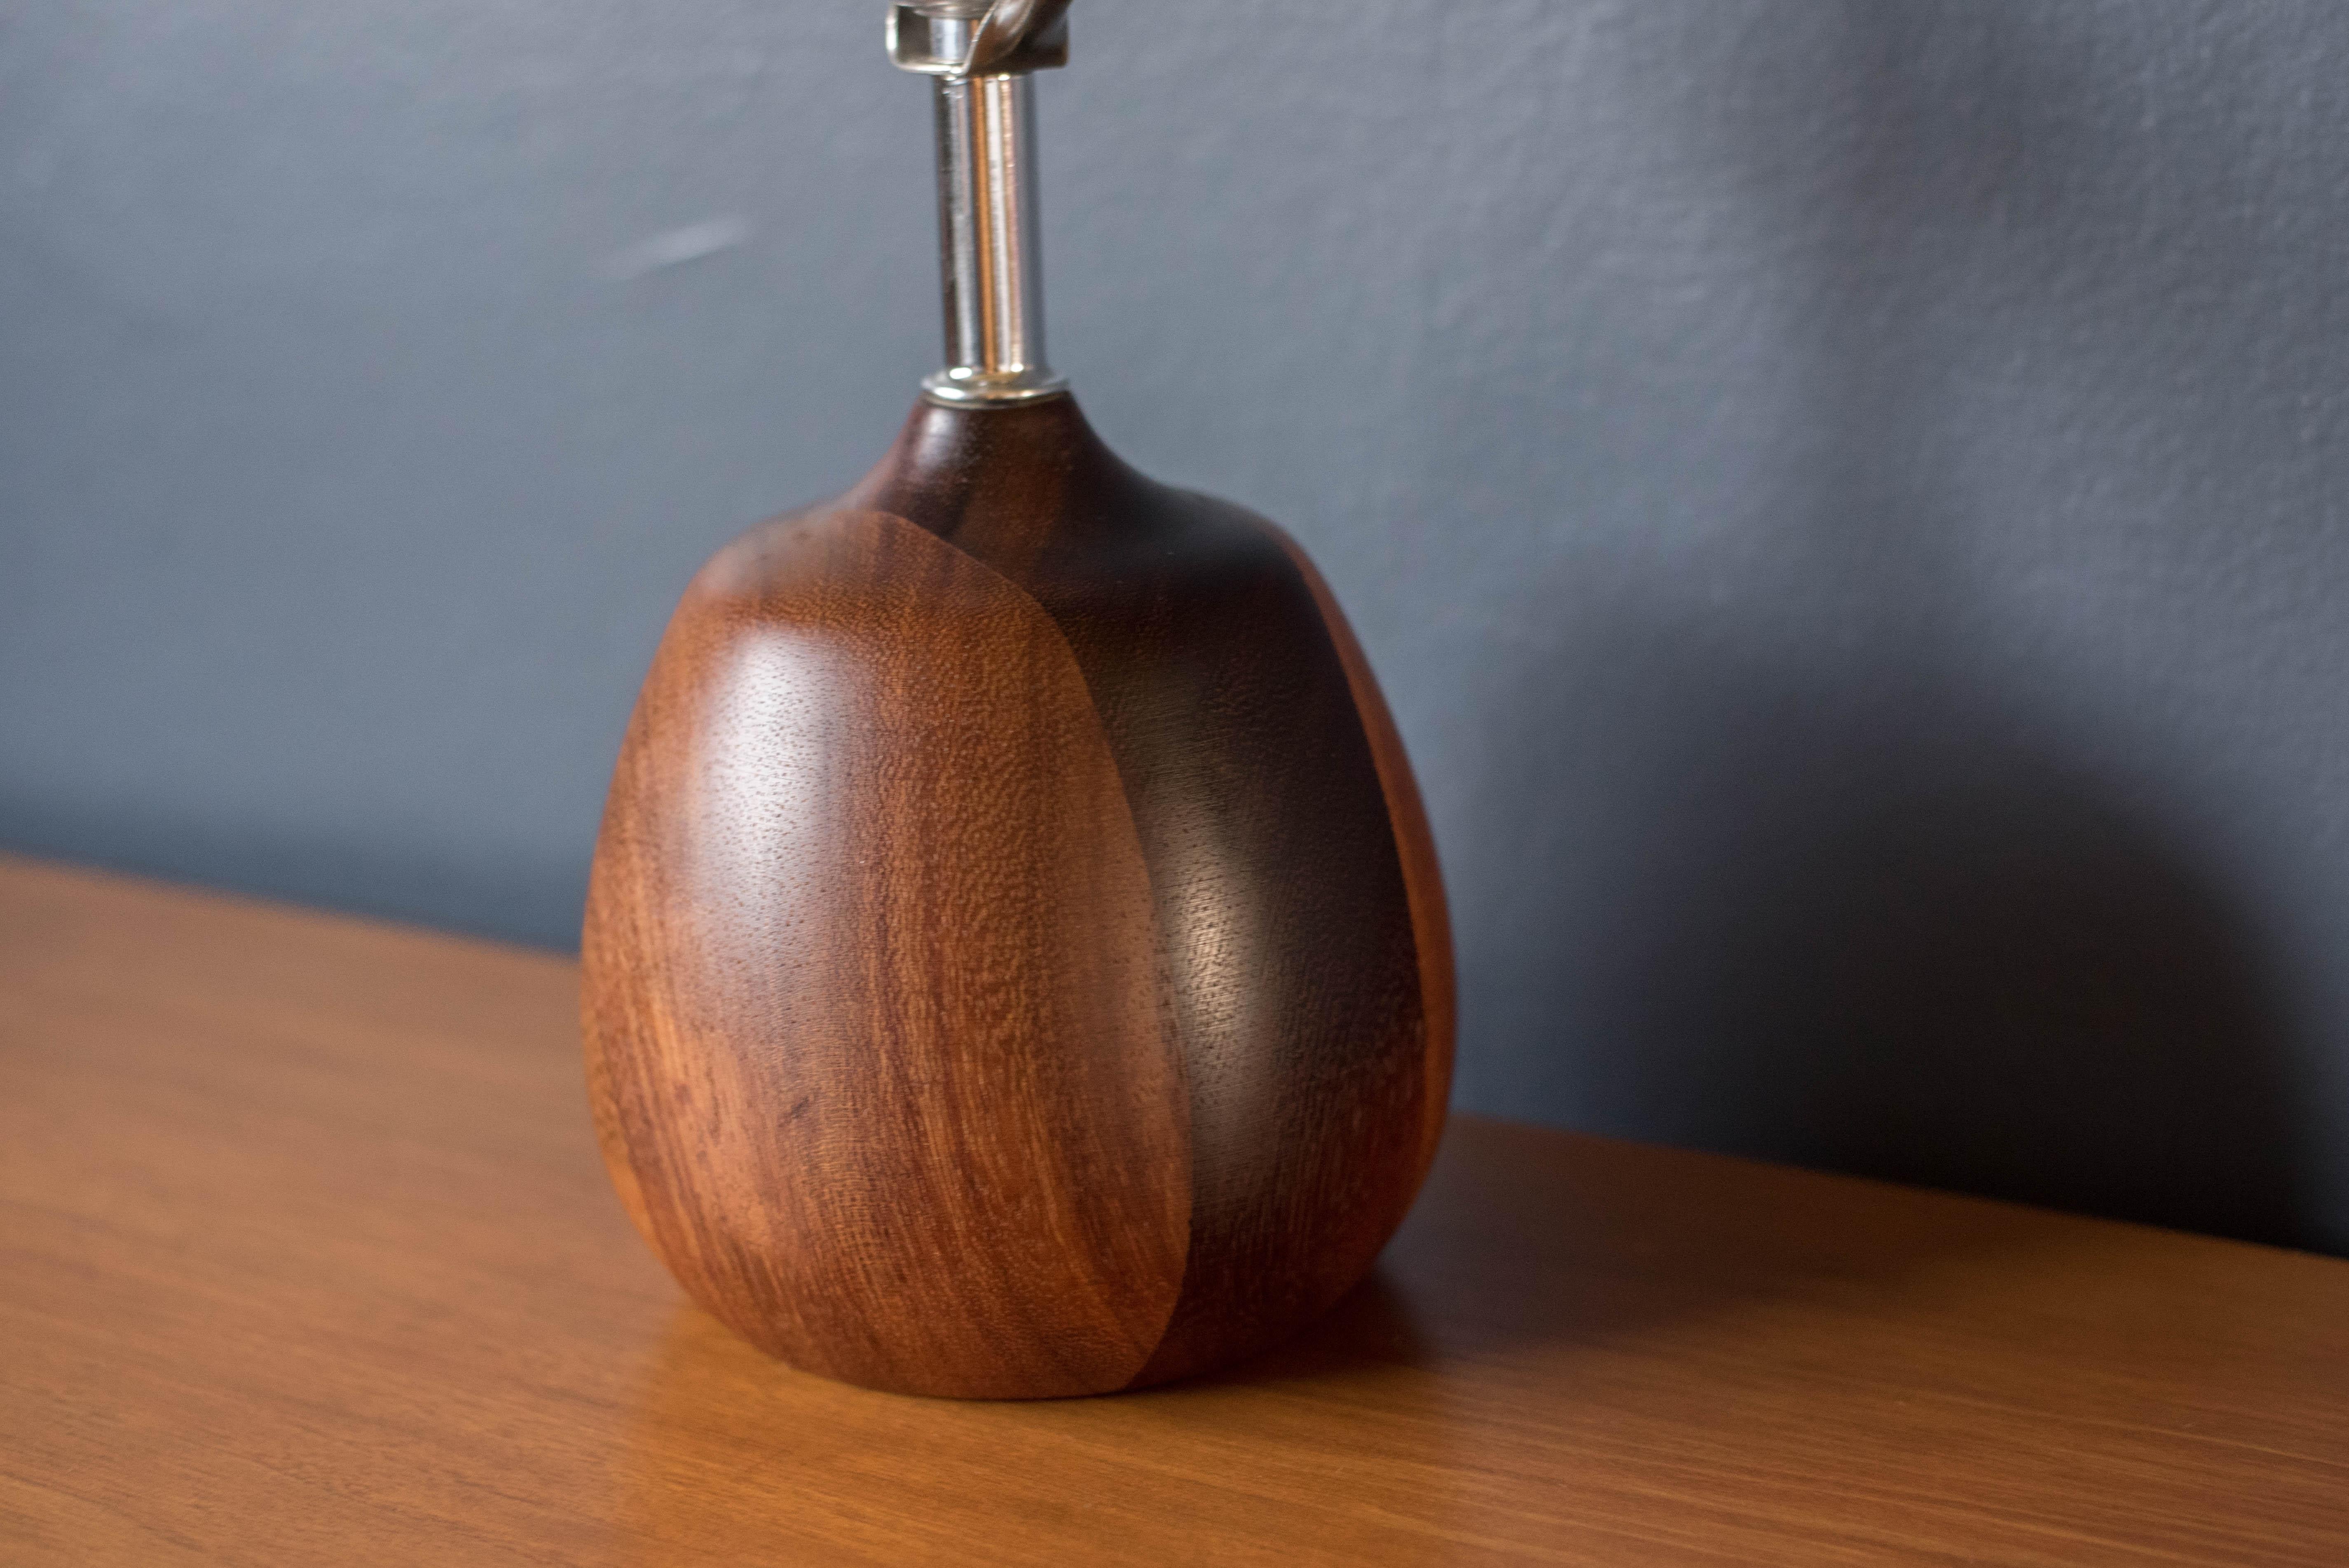 Sculptural Pair of Scandinavian Mid-Century Modern Round Teak Wood Table Lamps  In Good Condition For Sale In San Jose, CA